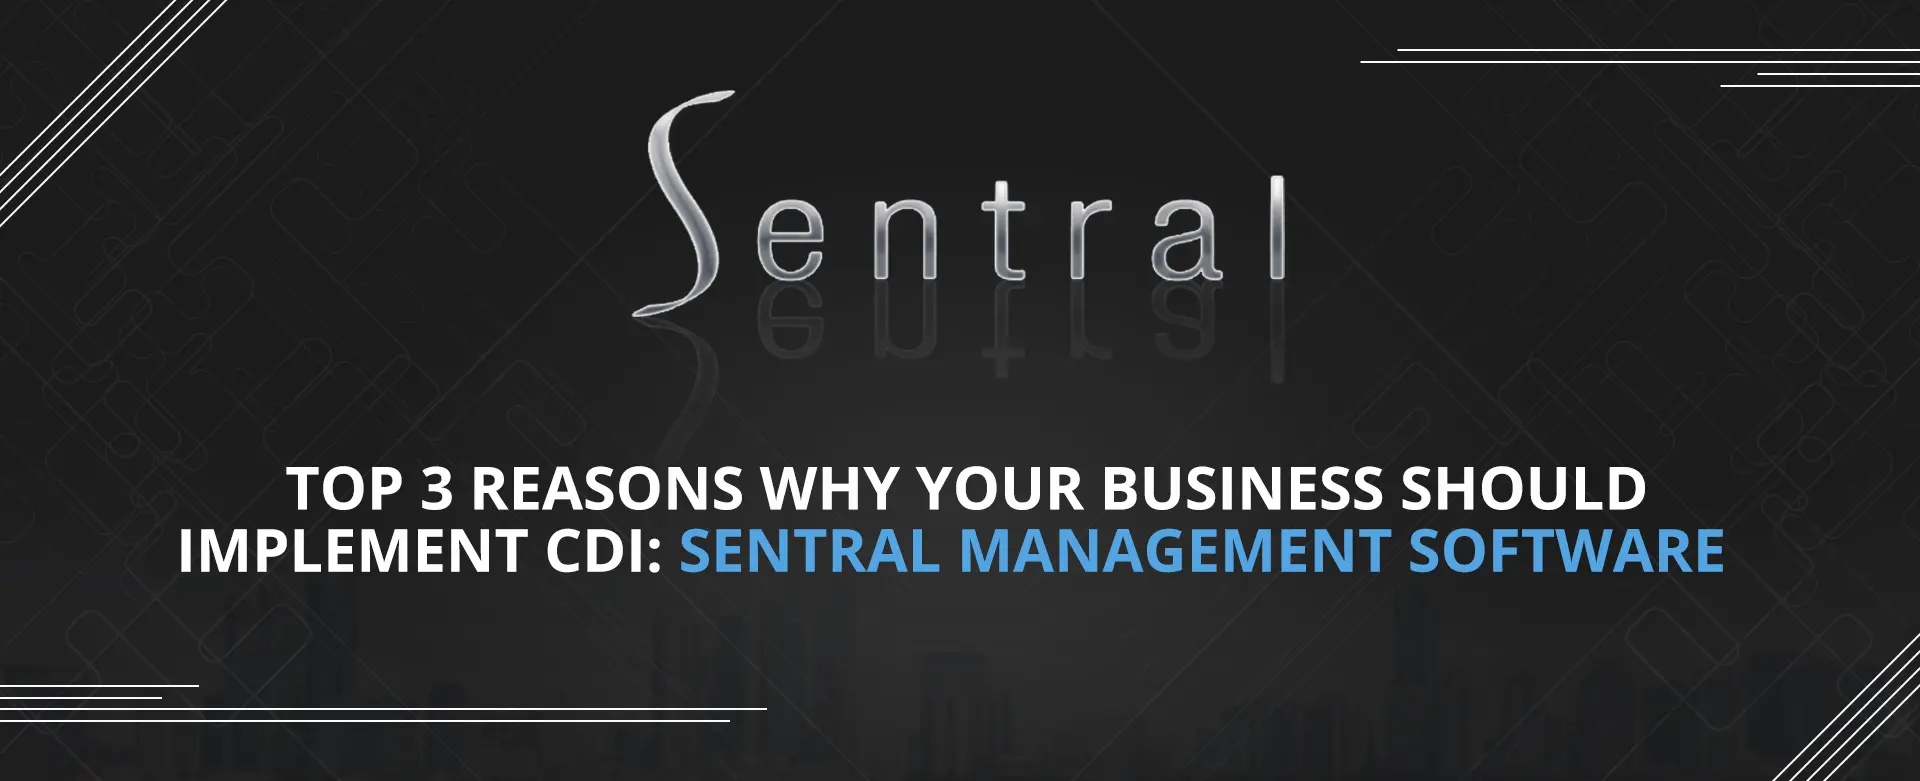 Top 3 Reasons Why Your Business Should Implement CDI Sentral Management Software